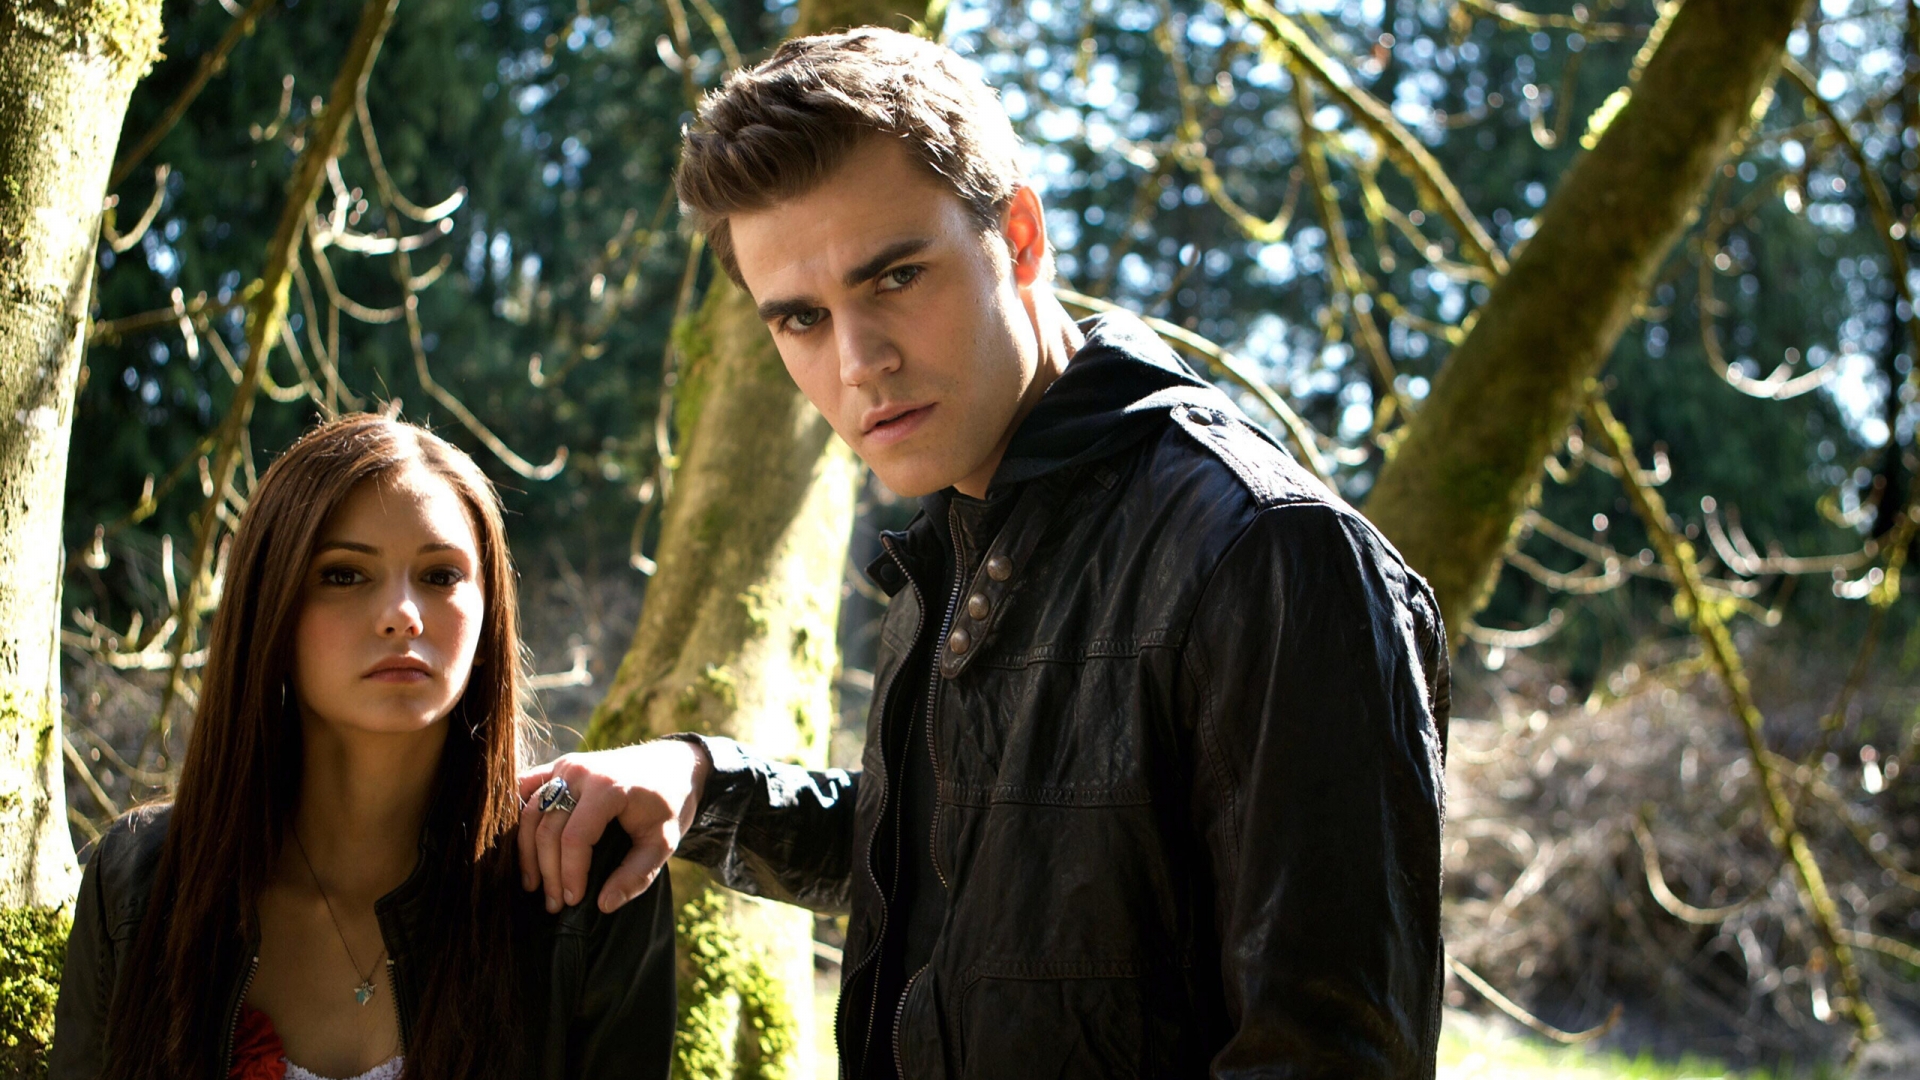 Stefan and Elena for 1920 x 1080 HDTV 1080p resolution